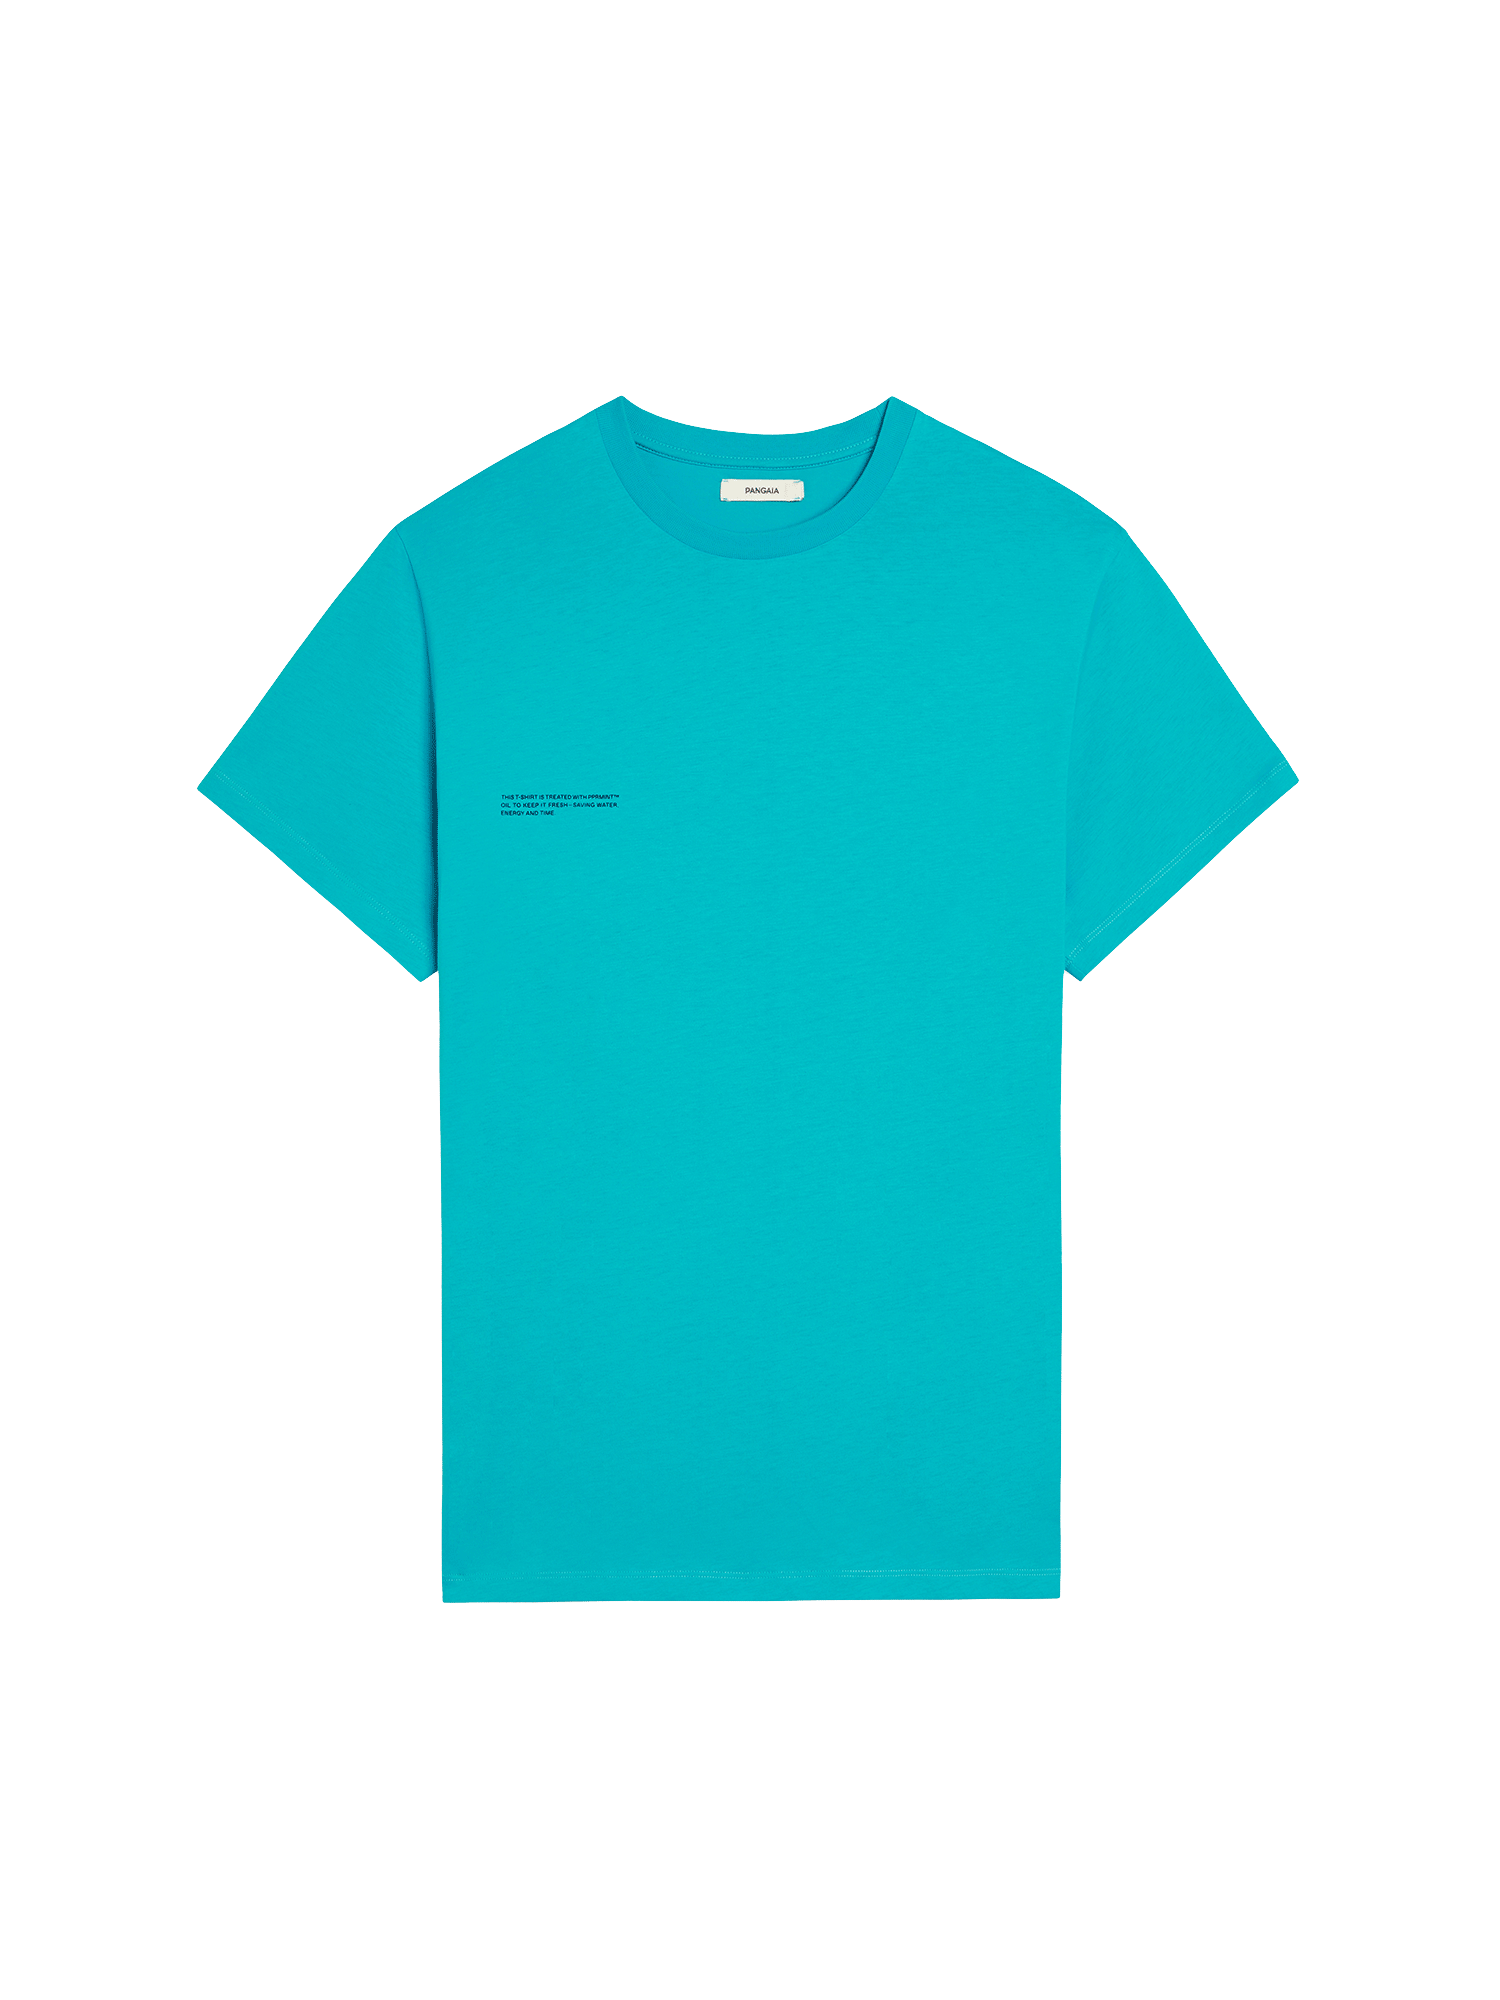 https://storage.googleapis.com/download/storage/v1/b/whering.appspot.com/o/marketplace_product_images%2Fpangaia-archive-seasonal-pprmint-organic-cotton-tshirt-ss22peacock-blue-turquoise-pEAMzyopoP8zkw2tw1zG62.png?generation=1687237232510994&alt=media